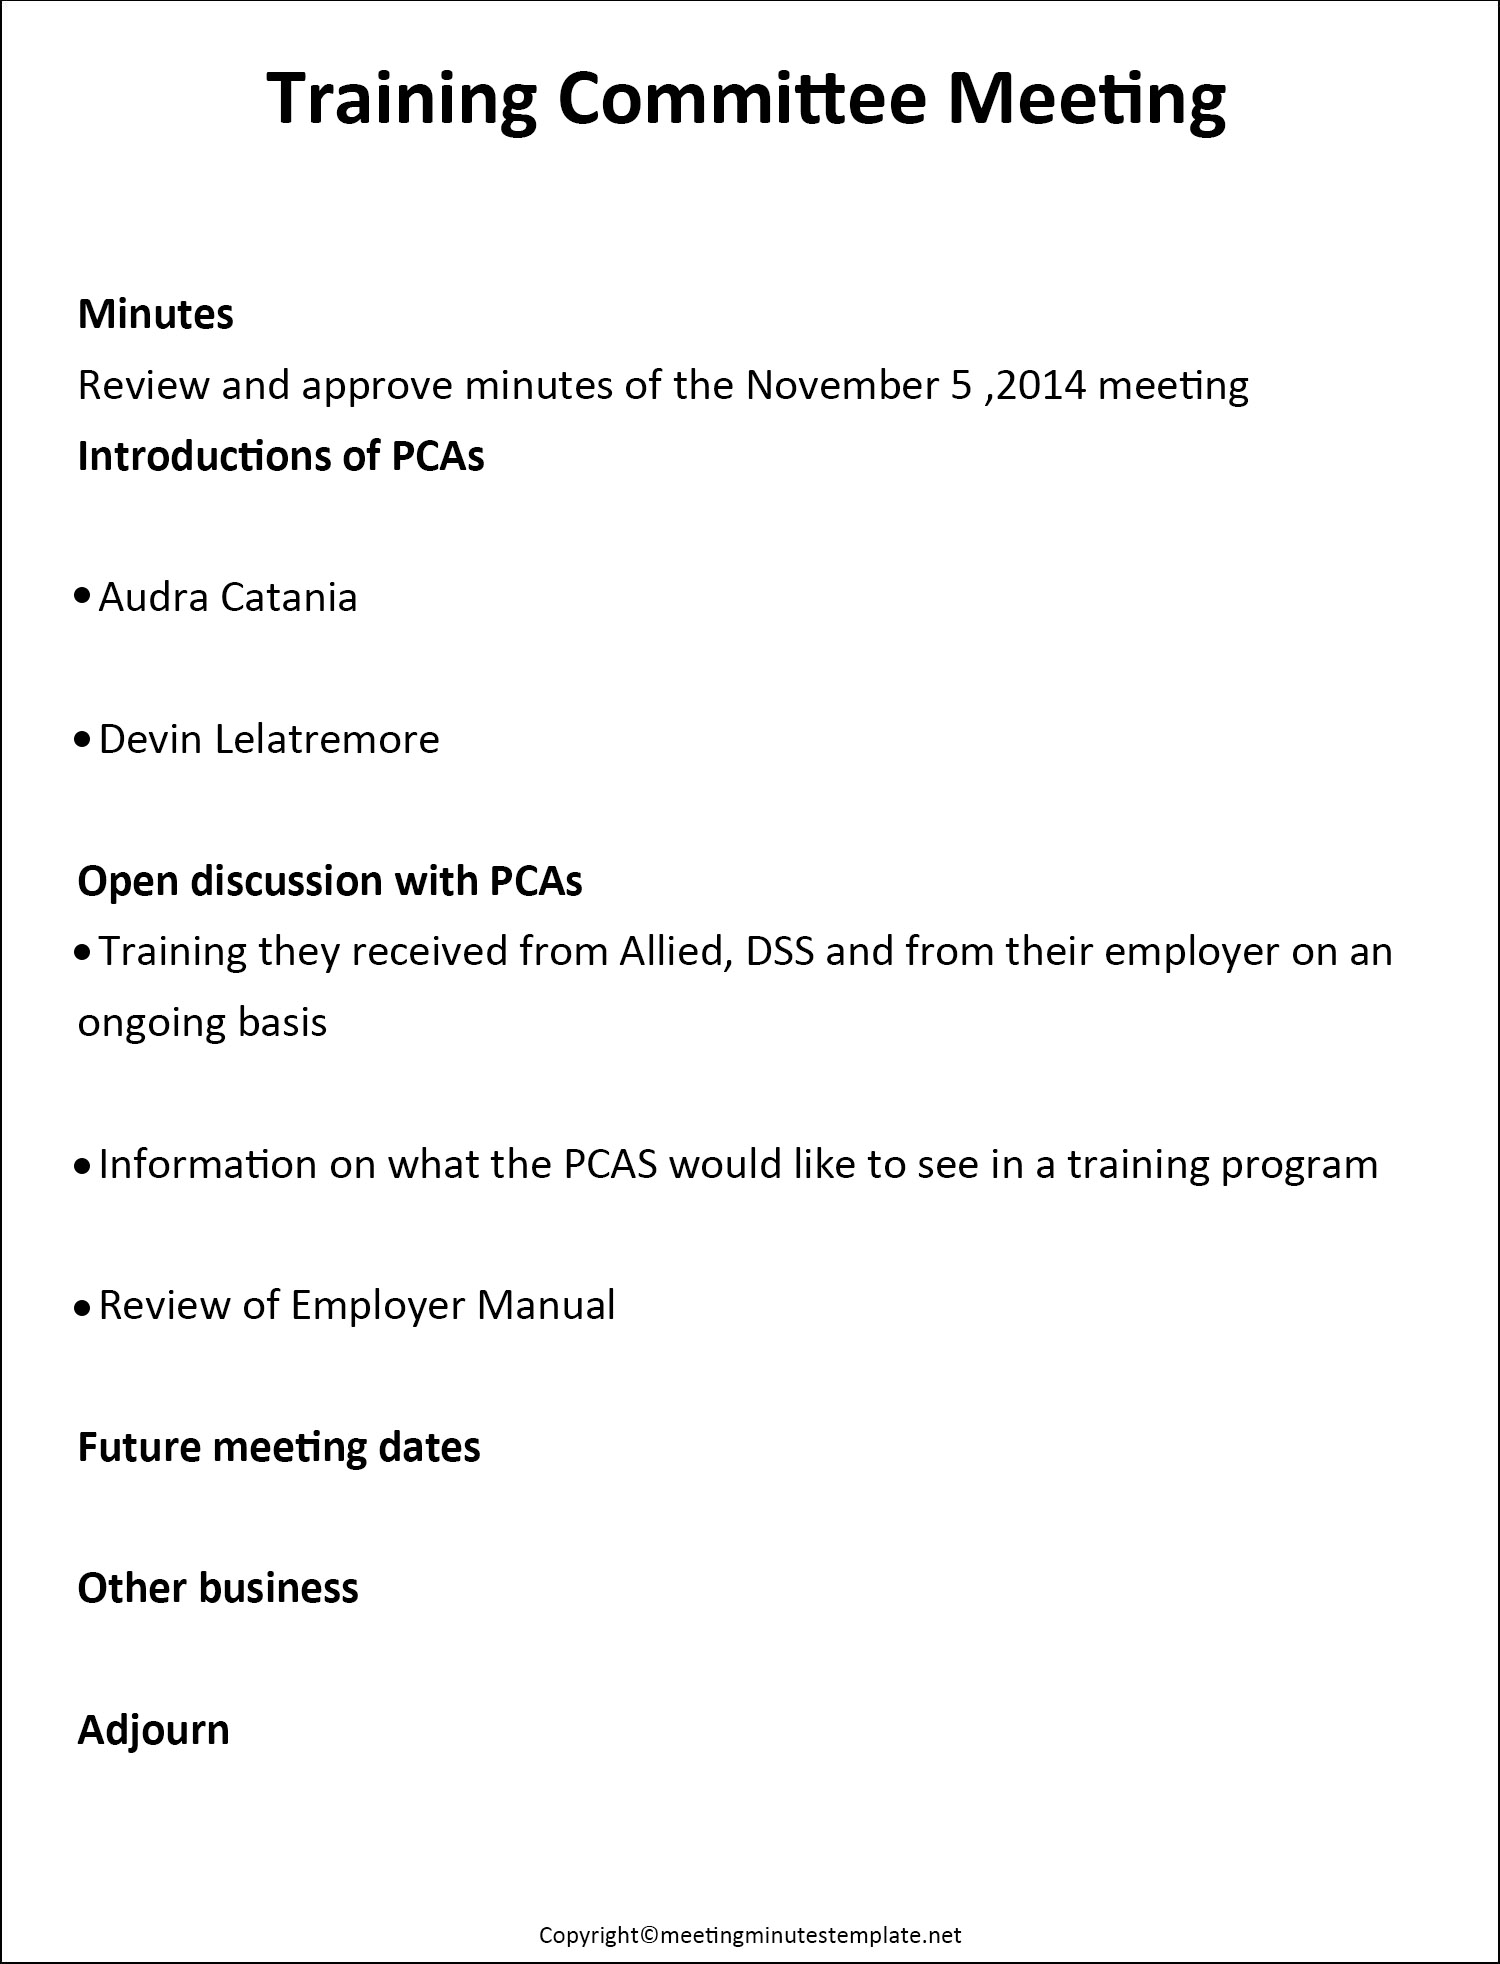 Training and Executive Committee Meeting Minutes Template